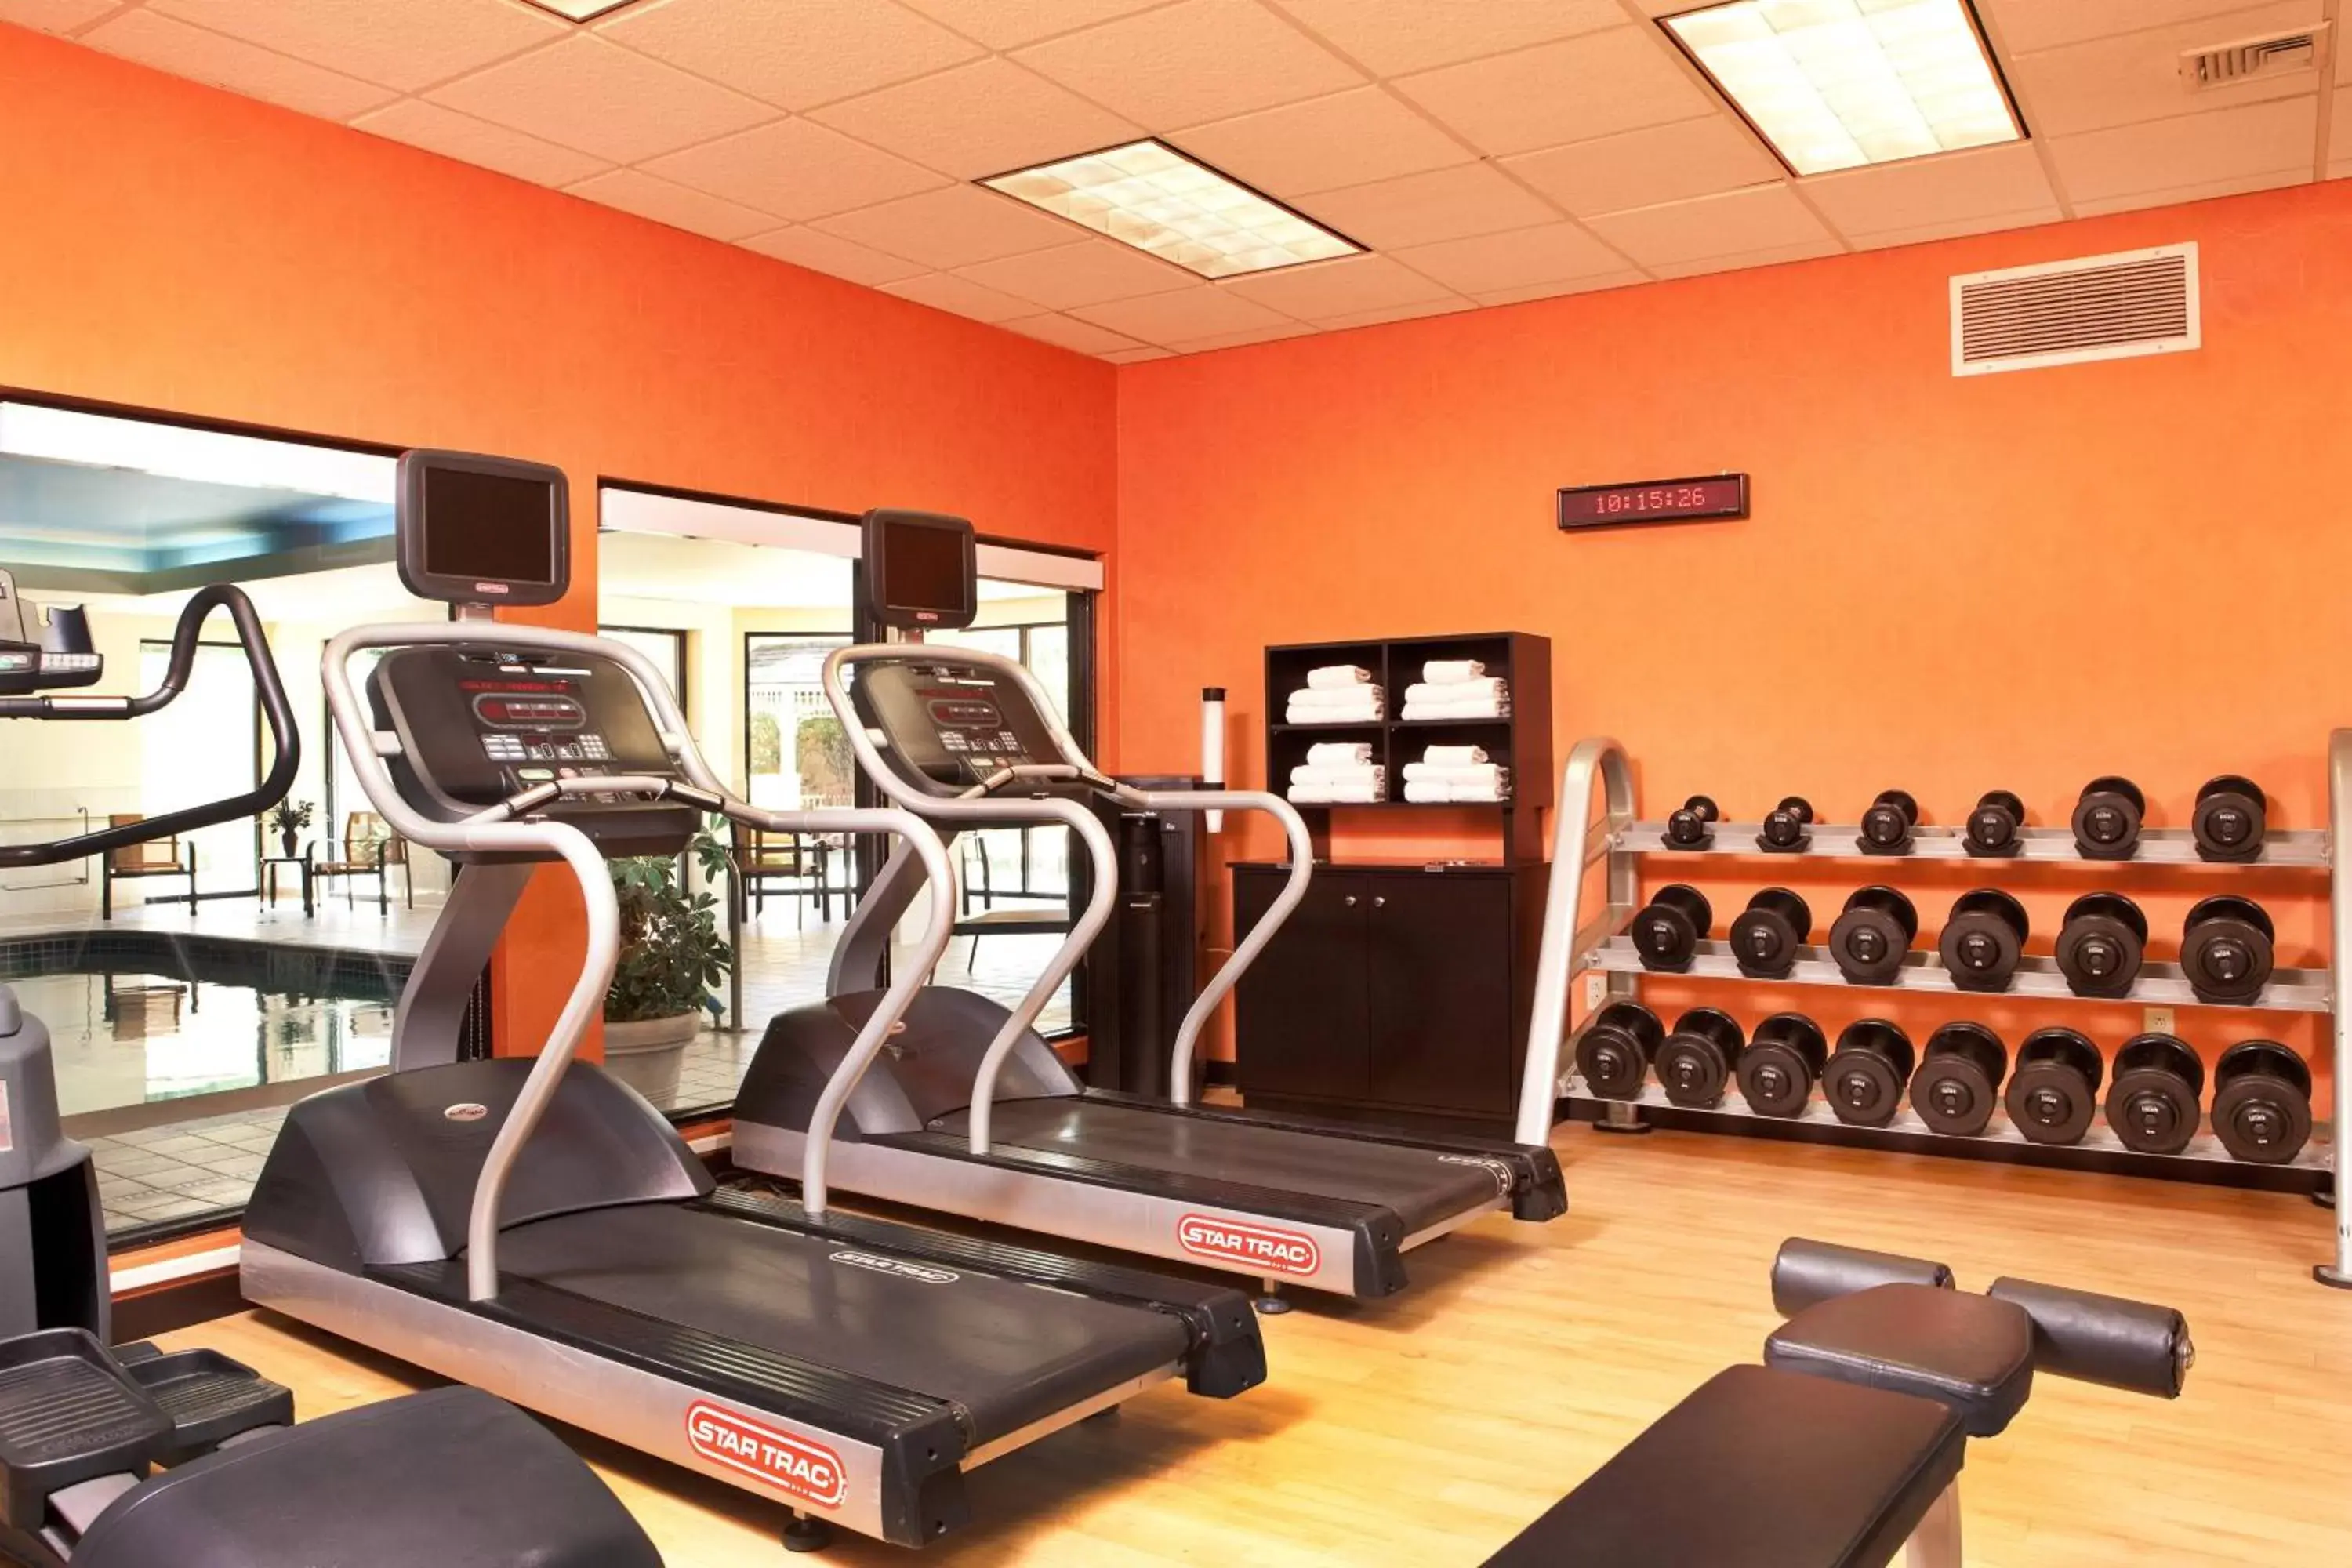 Fitness centre/facilities, Fitness Center/Facilities in Courtyard Hartford Manchester